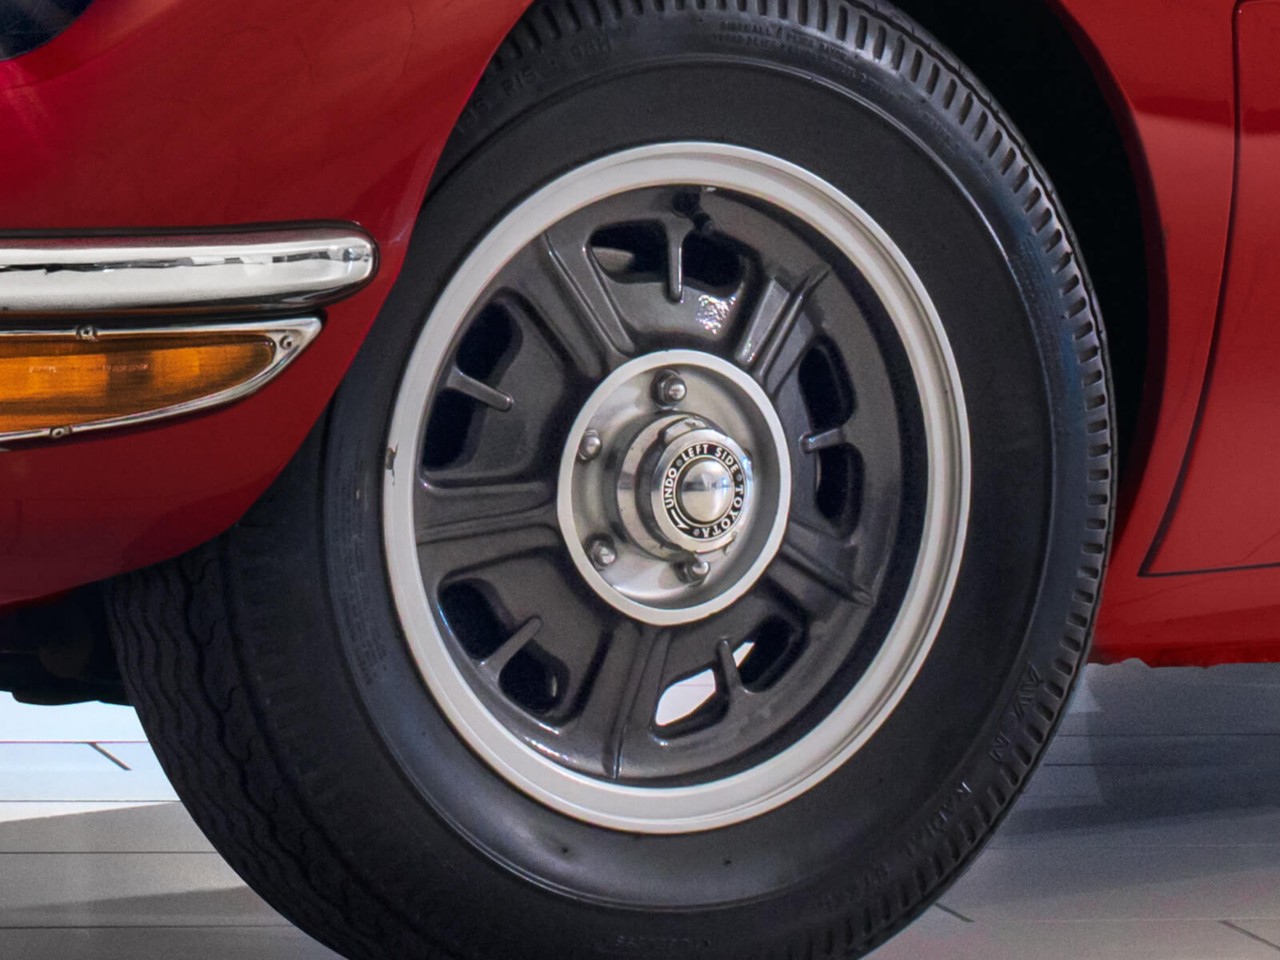 Toyota 2000GT car in red wheels close up